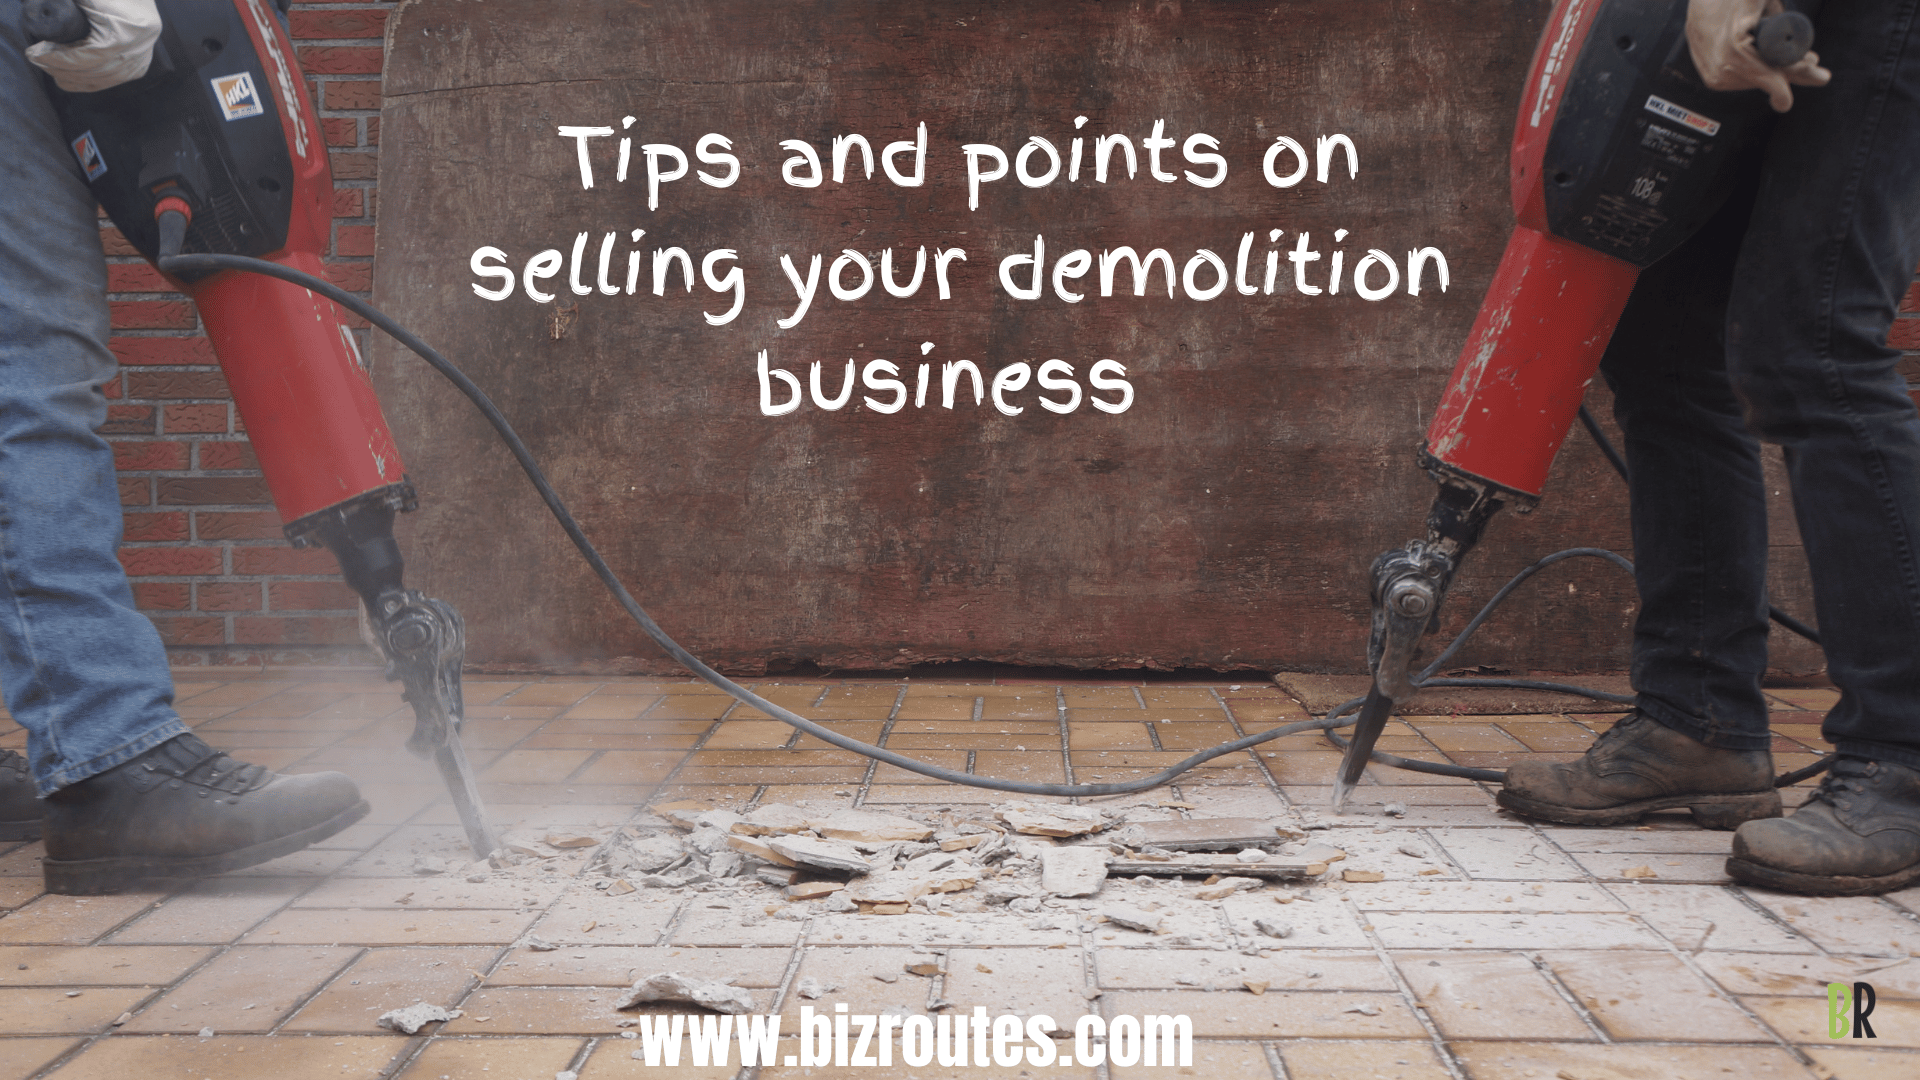 How to sell a demolition company quickly